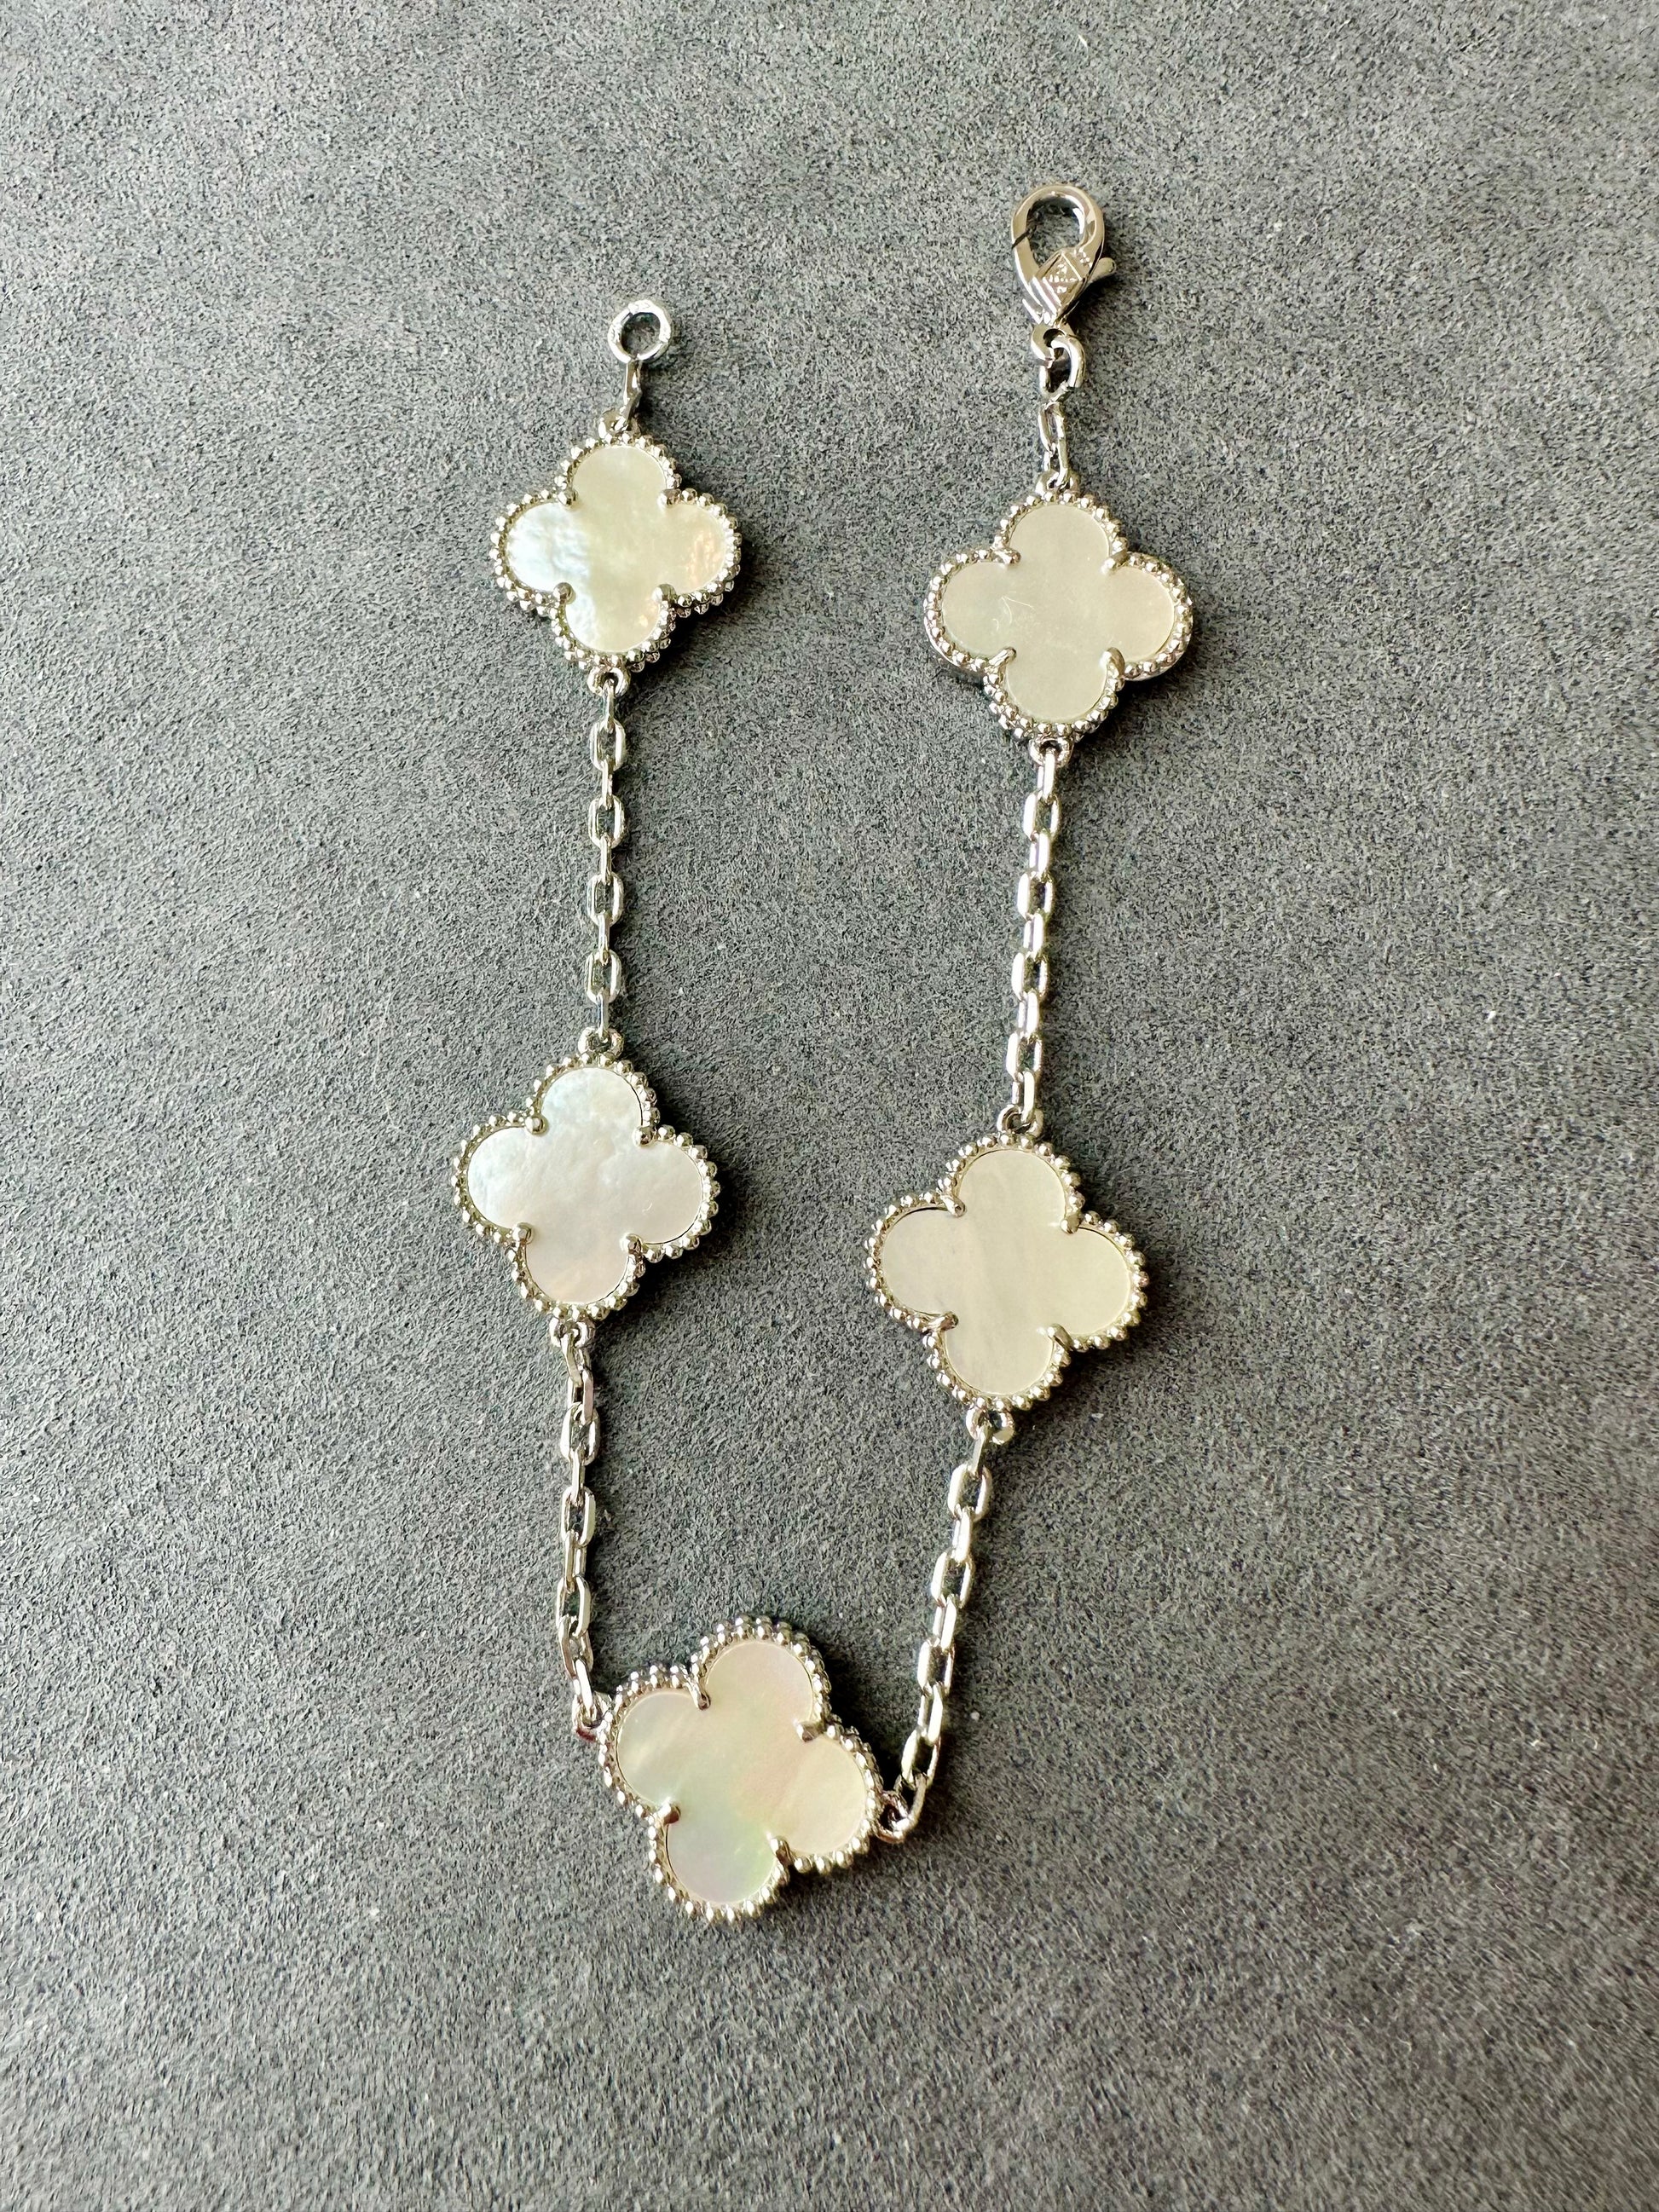 15mm White mother of pearl 5 motifs clover bracelet 925 silver with 18k gold plated 7.5 inches - ParadiseKissCo